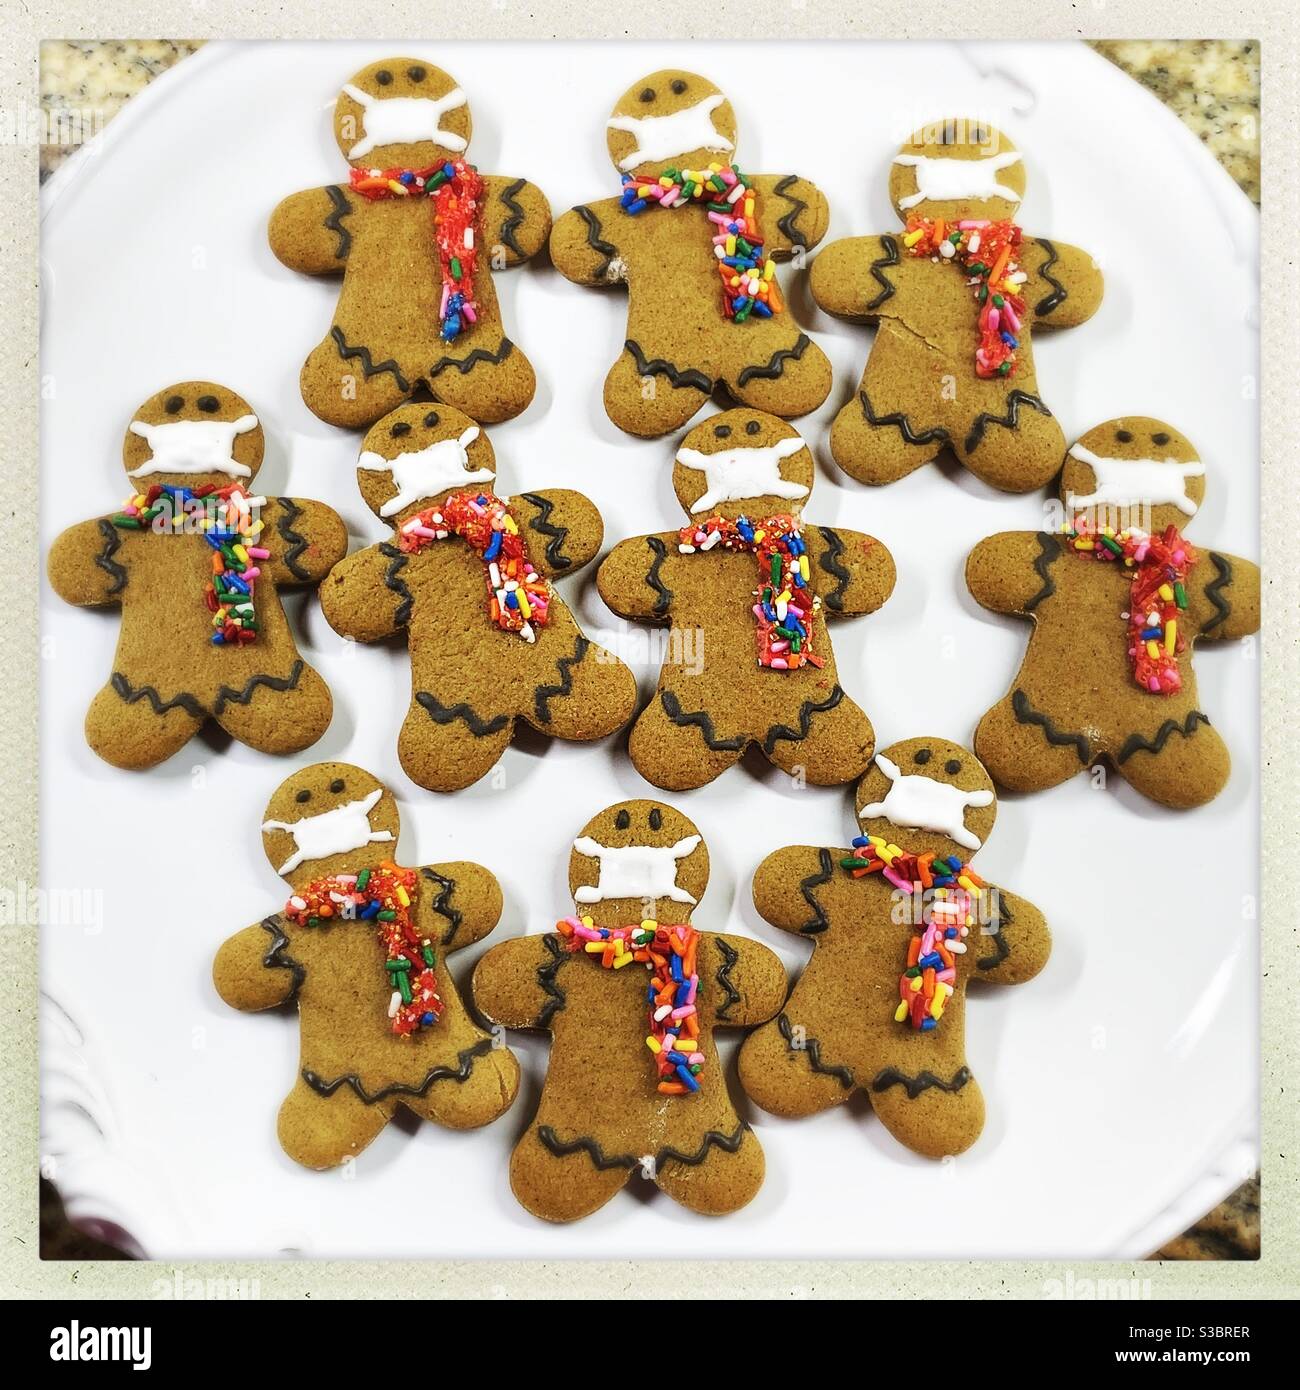 A plate of homemade gingerbread cookies is decorated with colorful candy scarves and face masks. Stock Photo